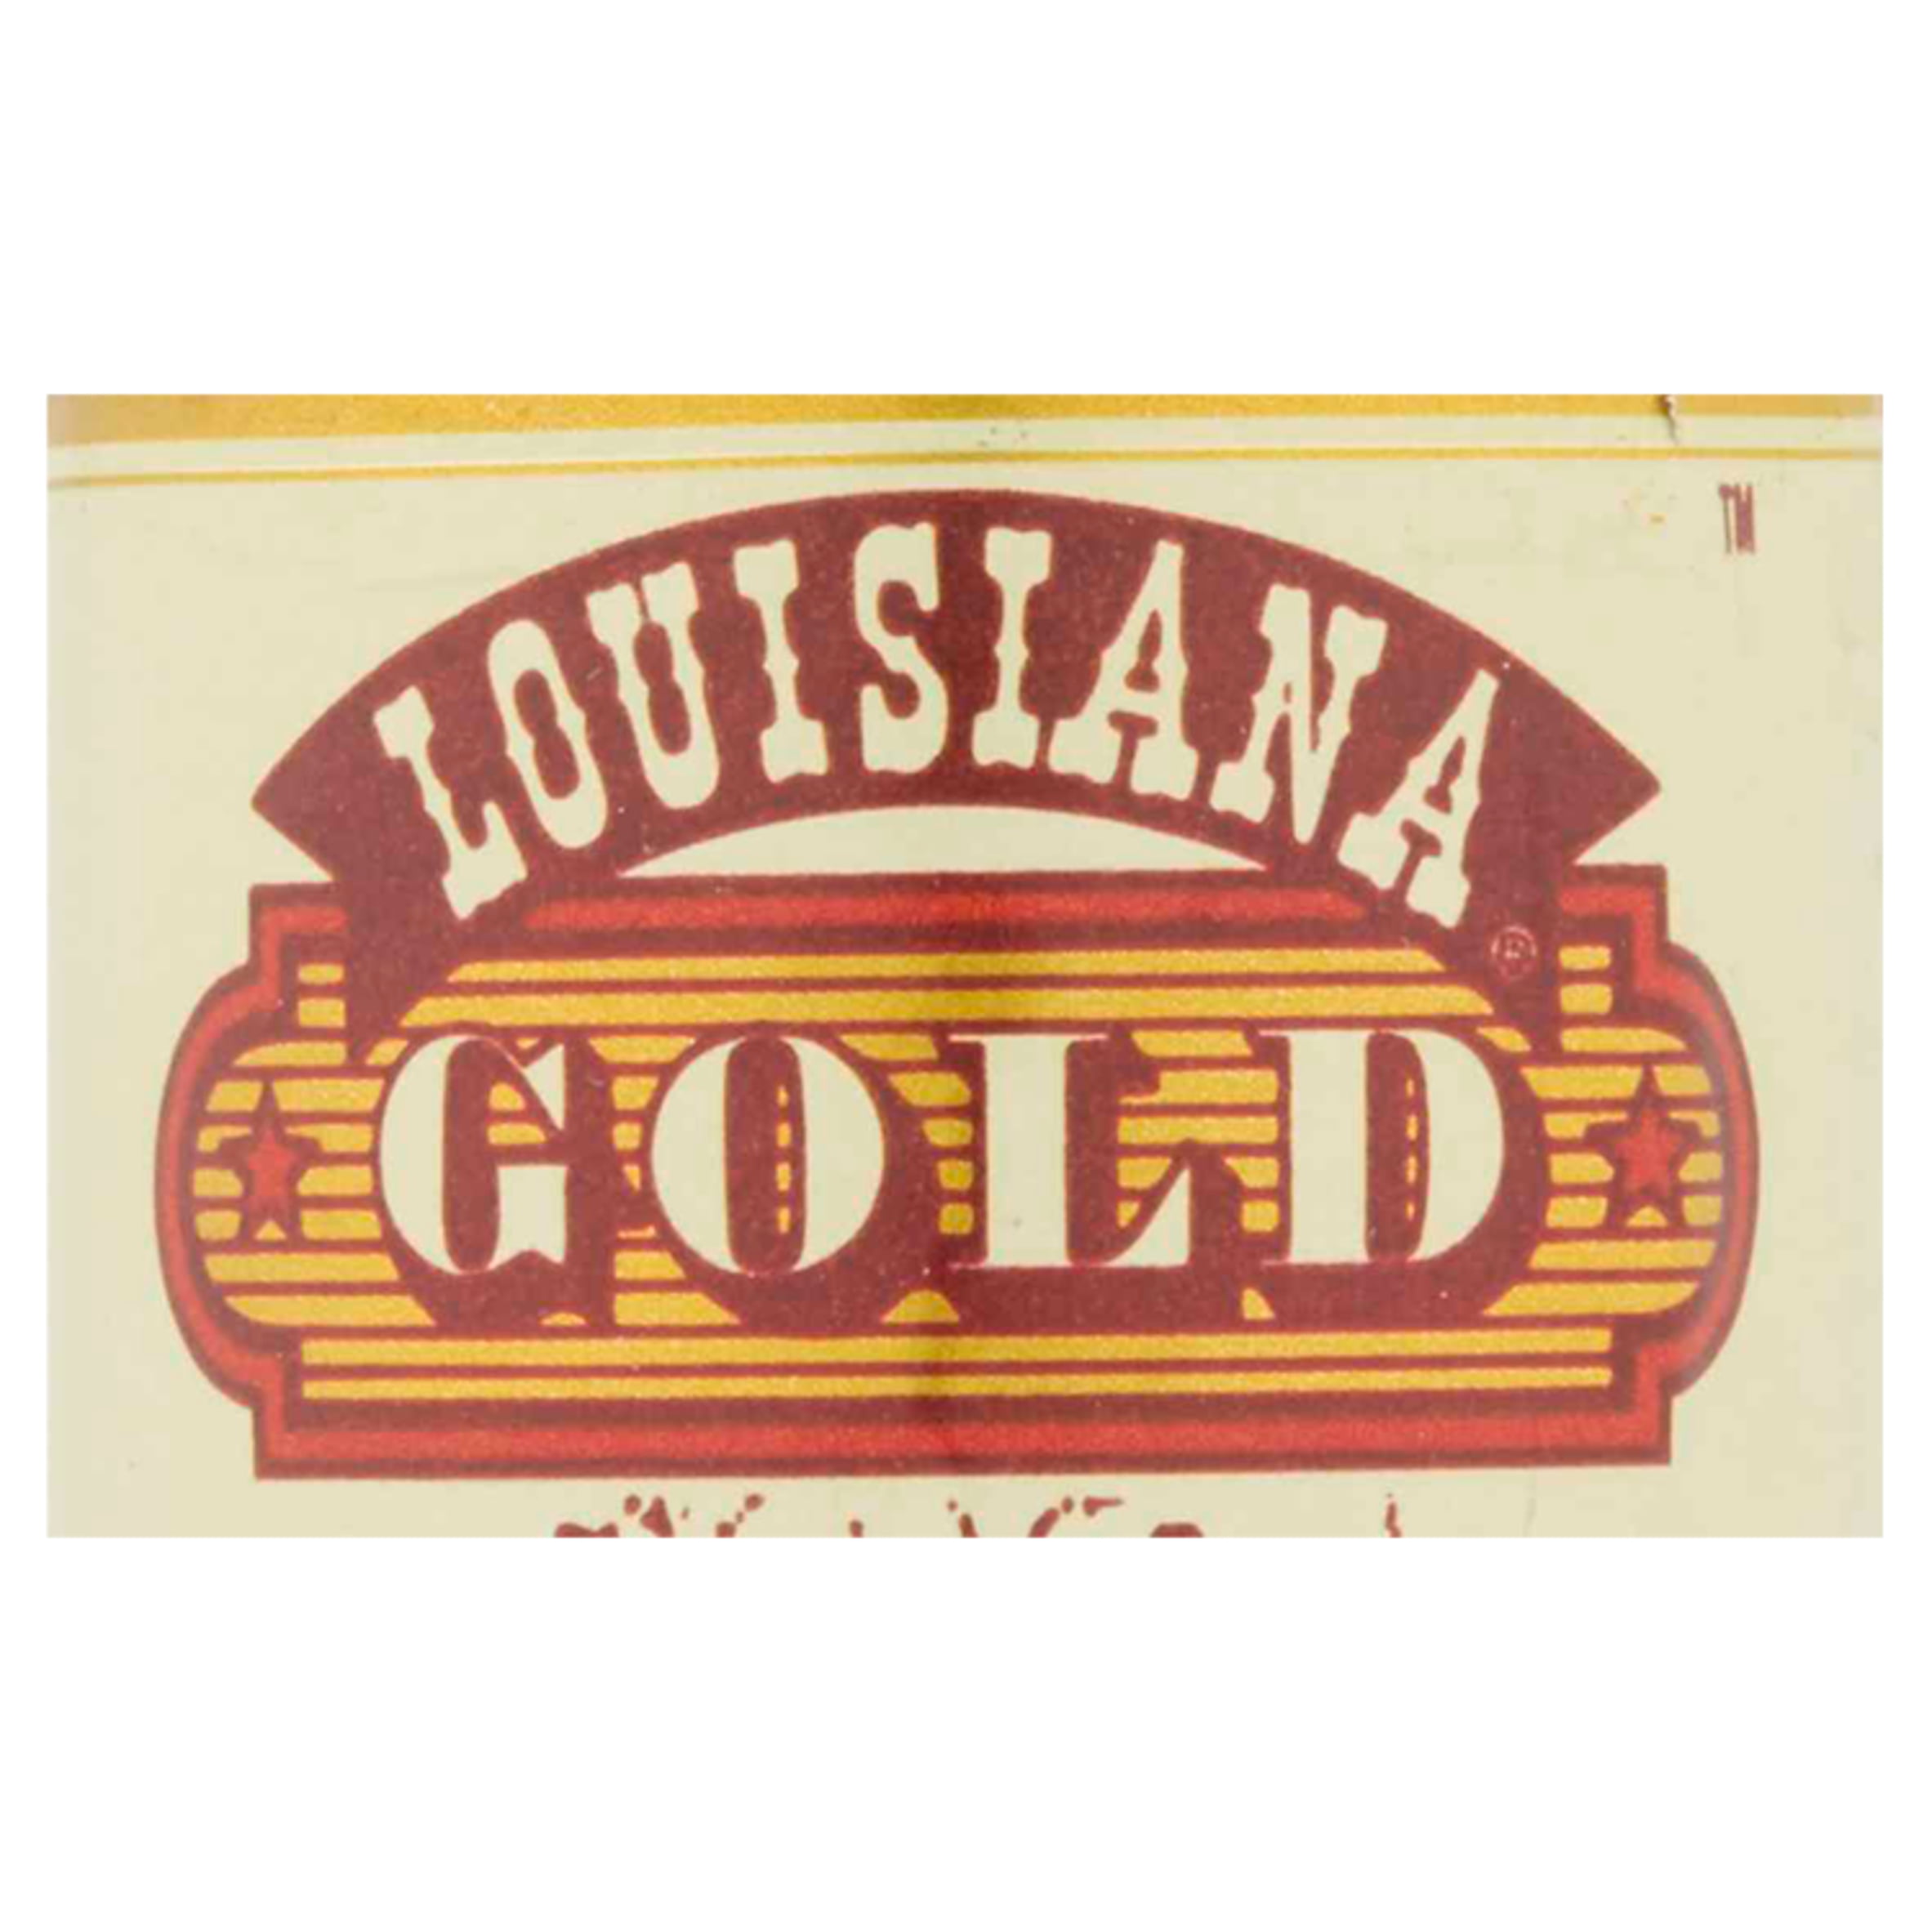 Louisiana Gold Pepper Hot Sauce – New Orleans To Go